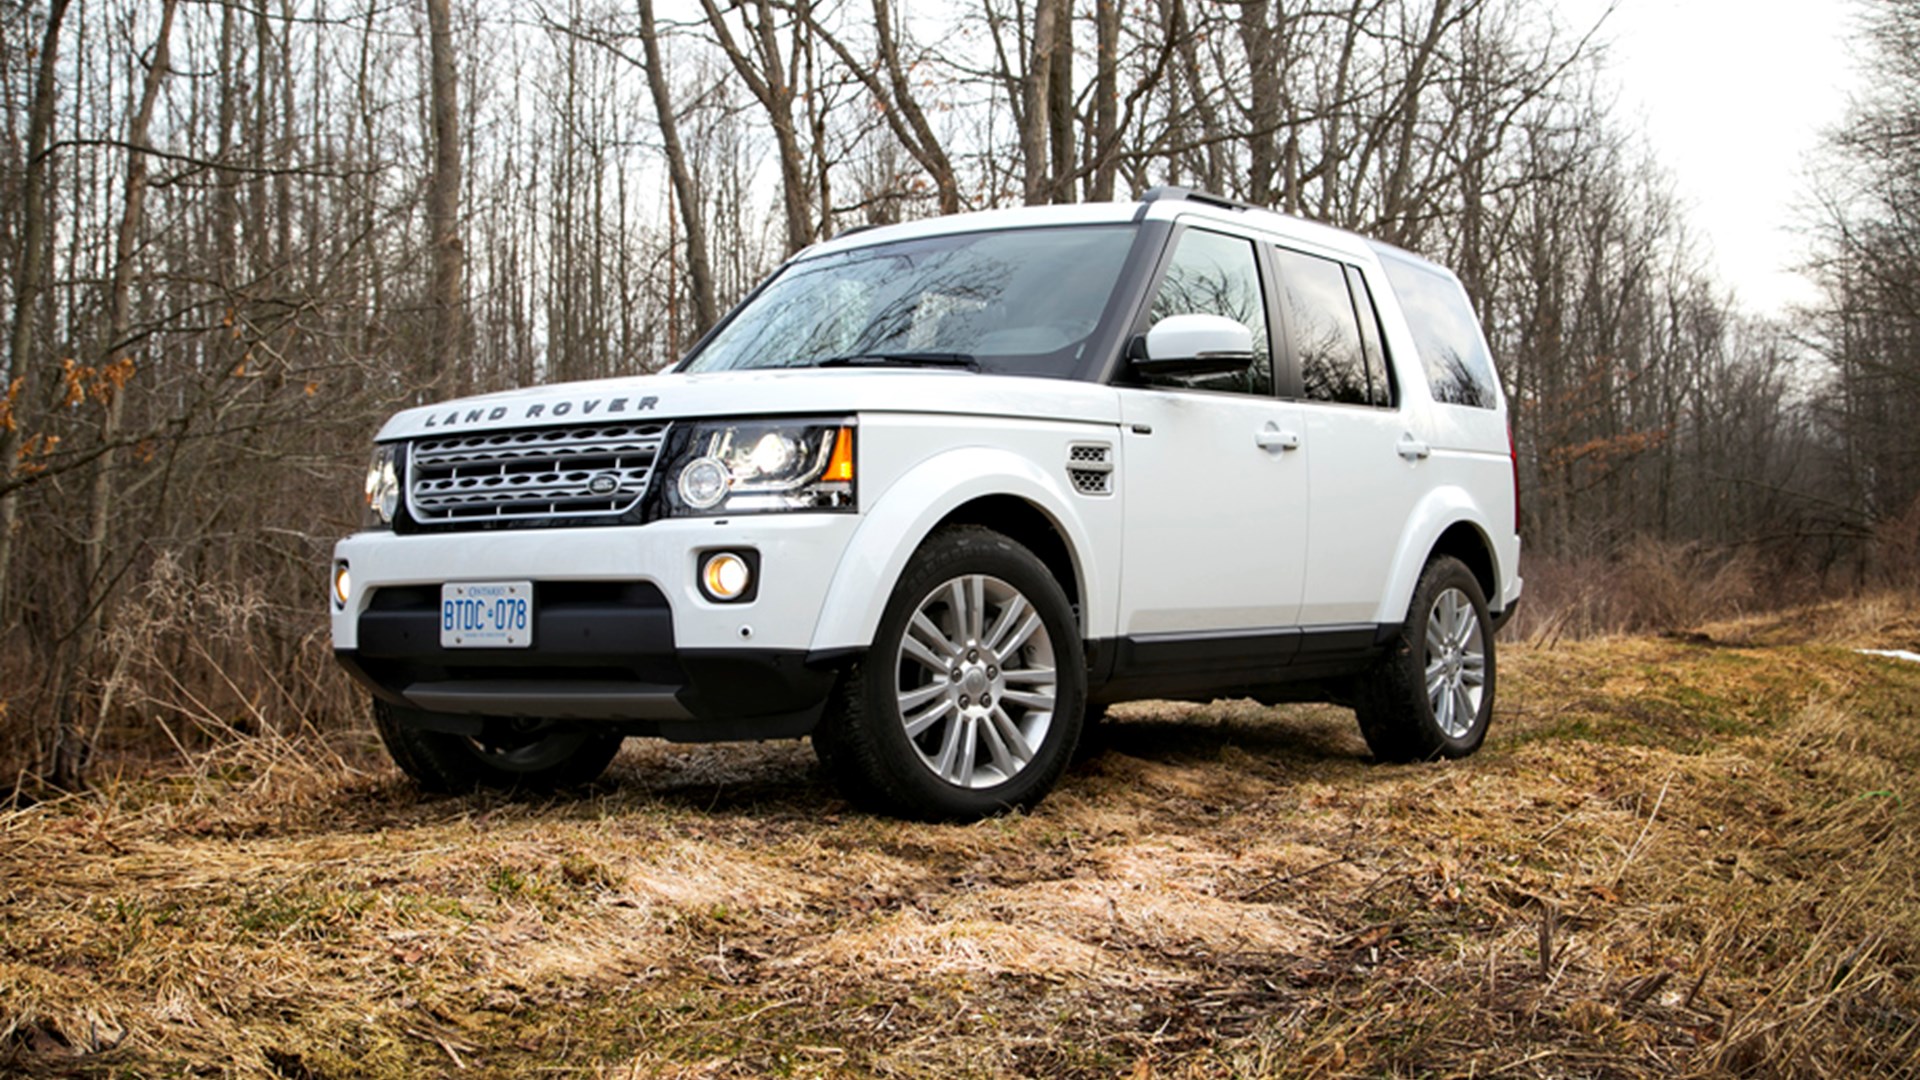 2010-2016 Land Rover LR4 Used Vehicle Review | AutoTrader.ca